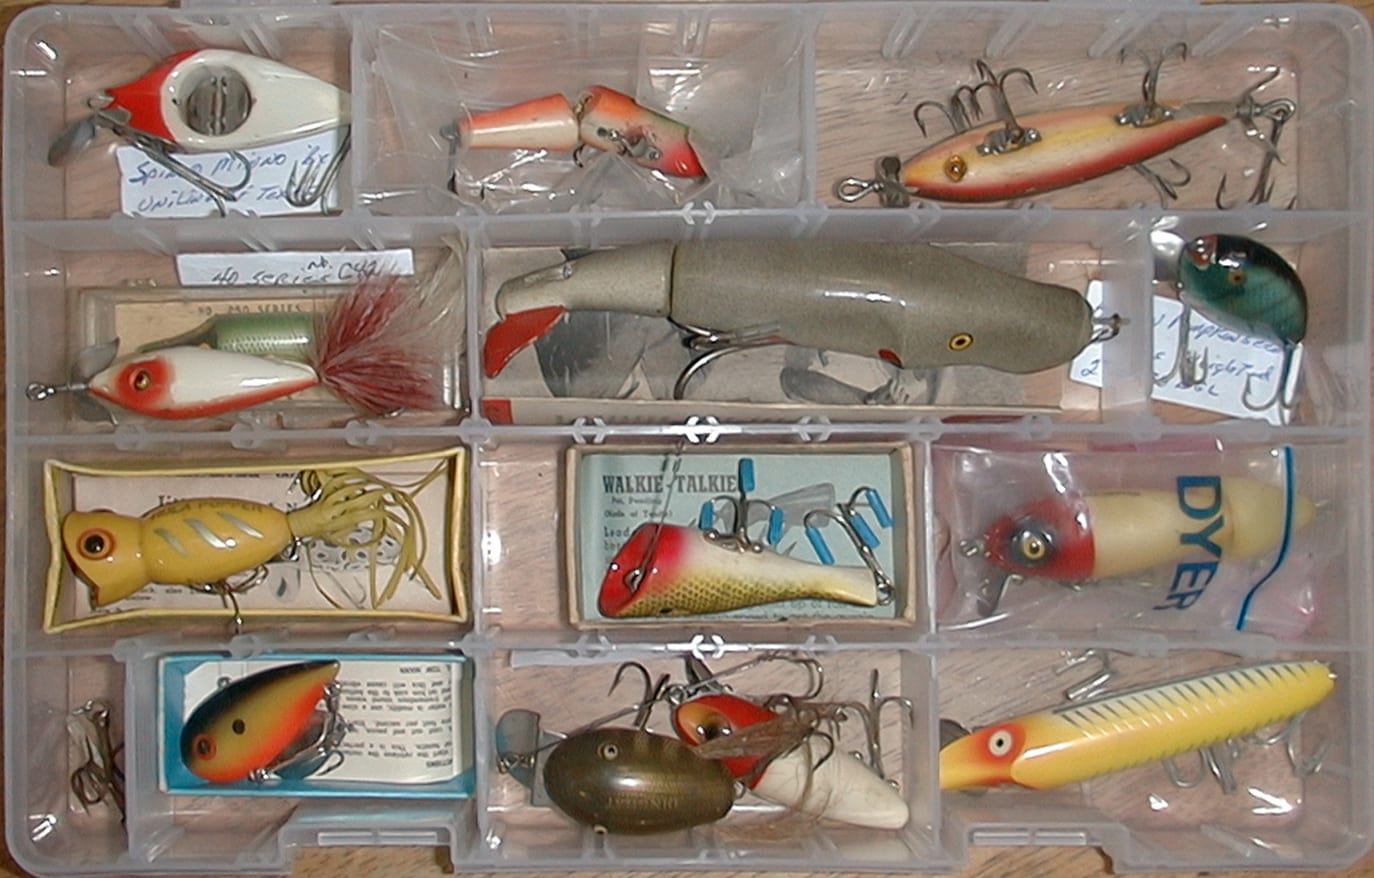 Pflueger Fishing Lure  Old Antique & Vintage Wood Fishing Lures Reels  Tackle & More